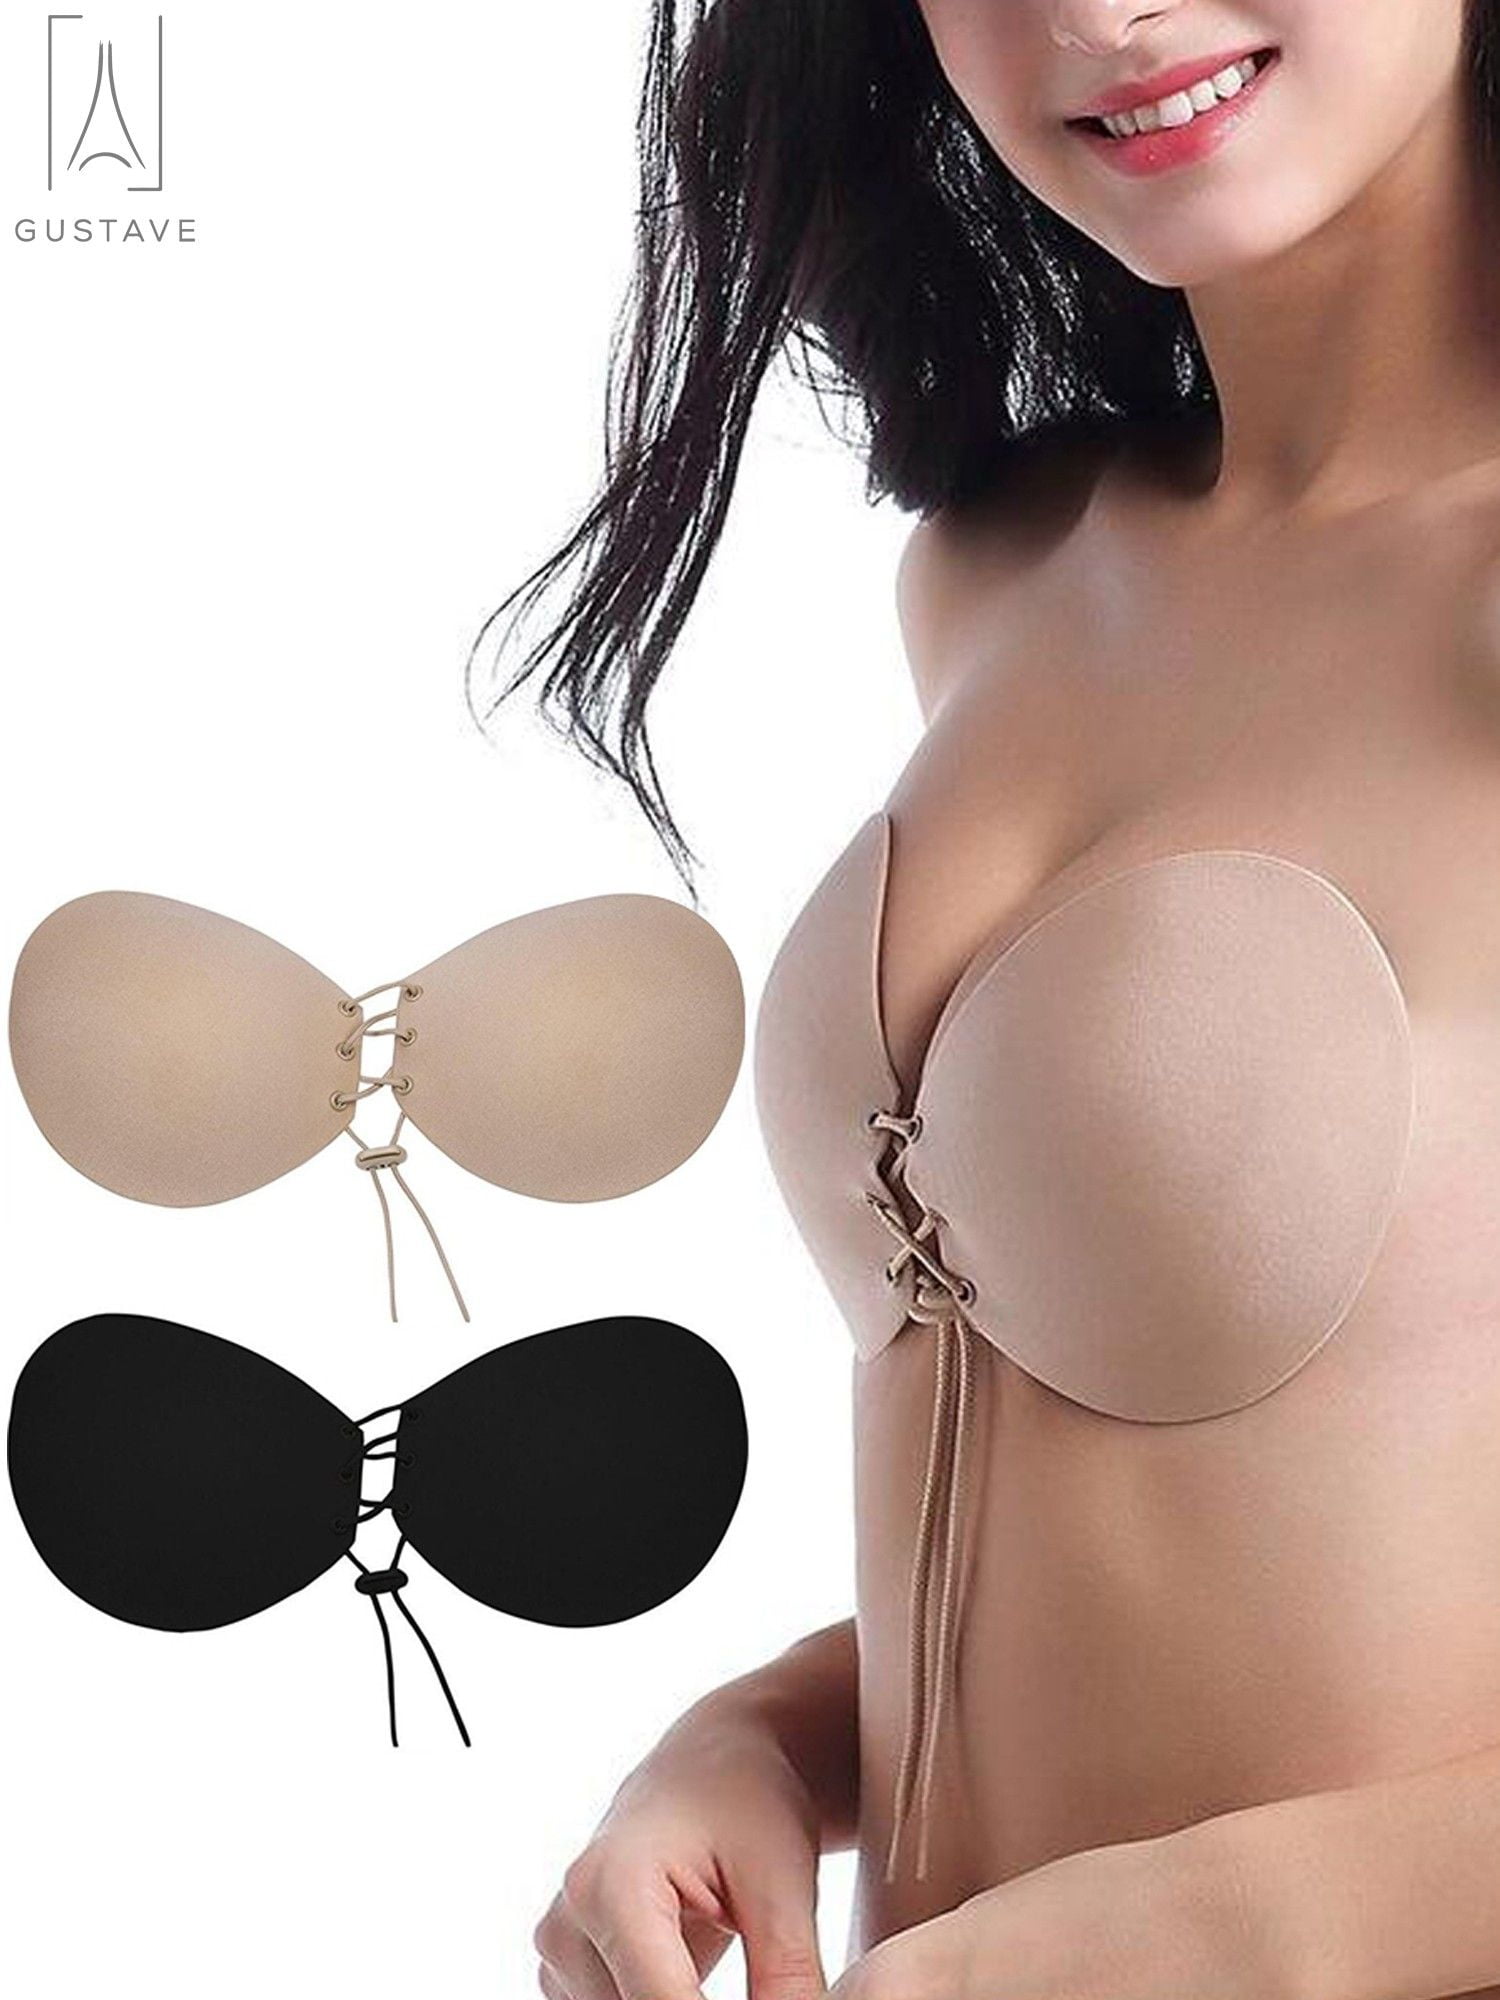 GustaveDesign 2 Packs Women's Sexy Strapless Invisible Bra Reusable  Self-Adhesive Push Up Bra Backless Sticky Silicone Bra Black & Skin, B Cup